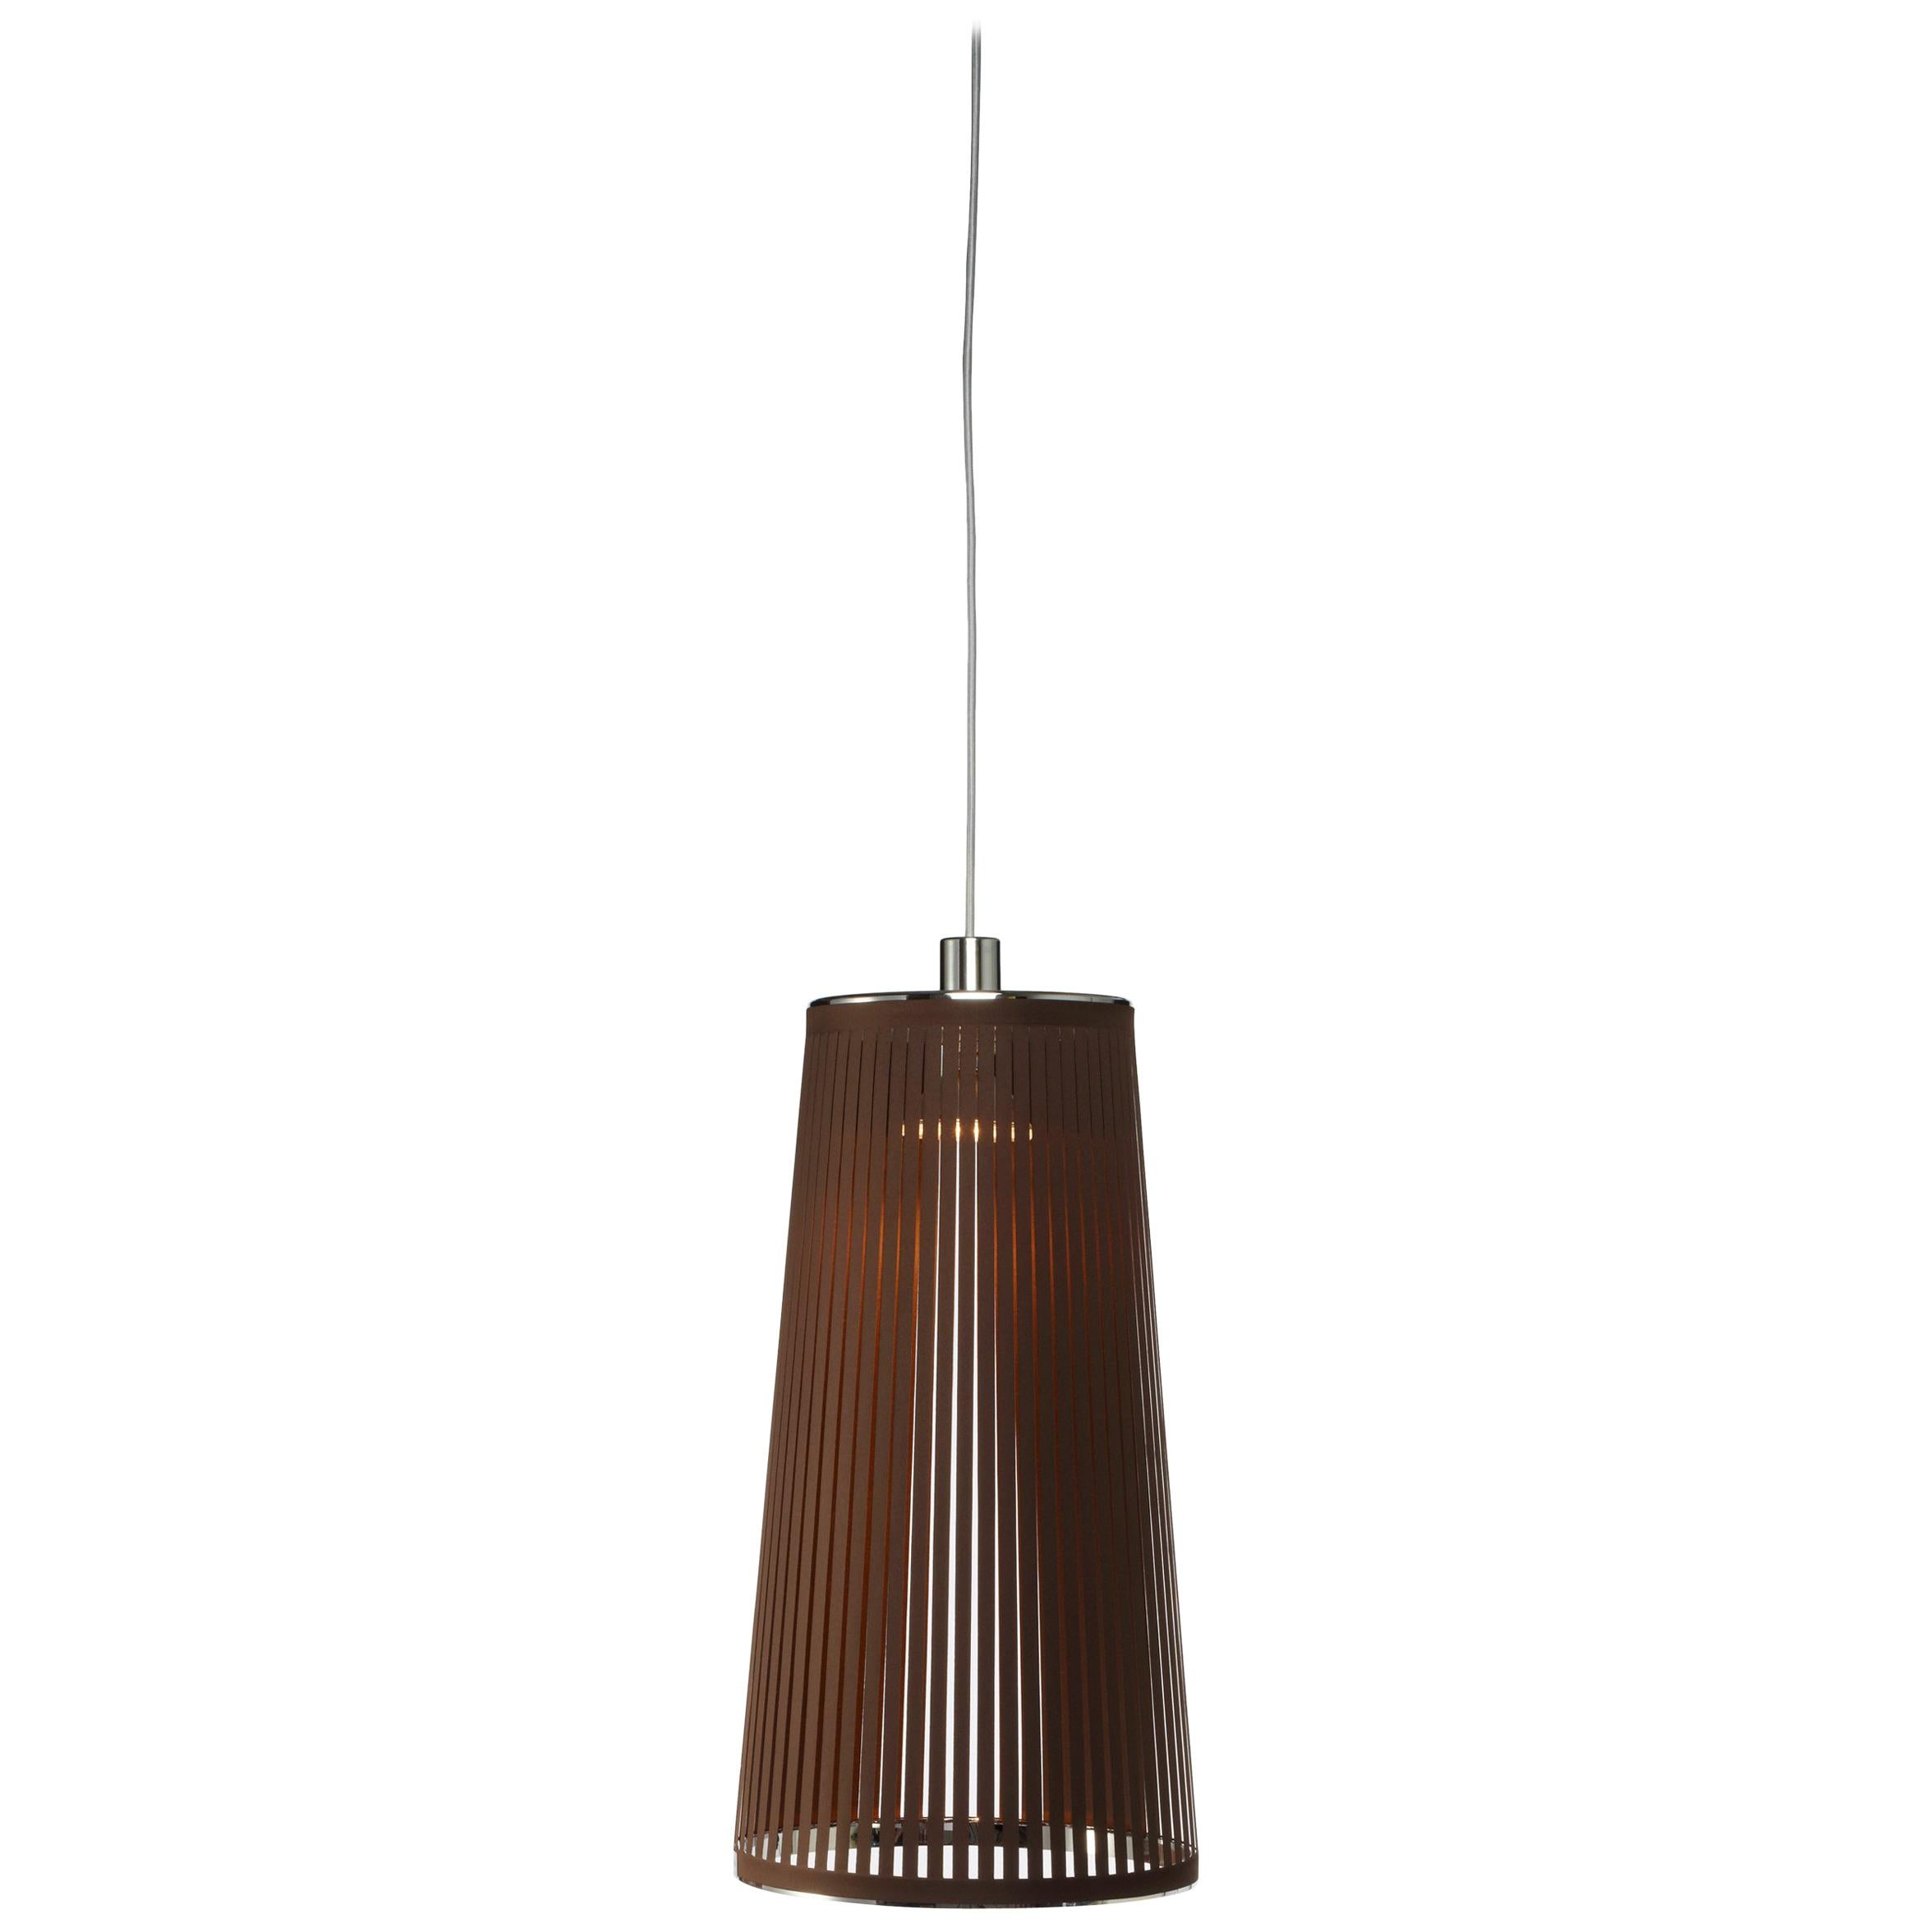 Solis 24 Pendant Light in Brown by Pablo Designs For Sale